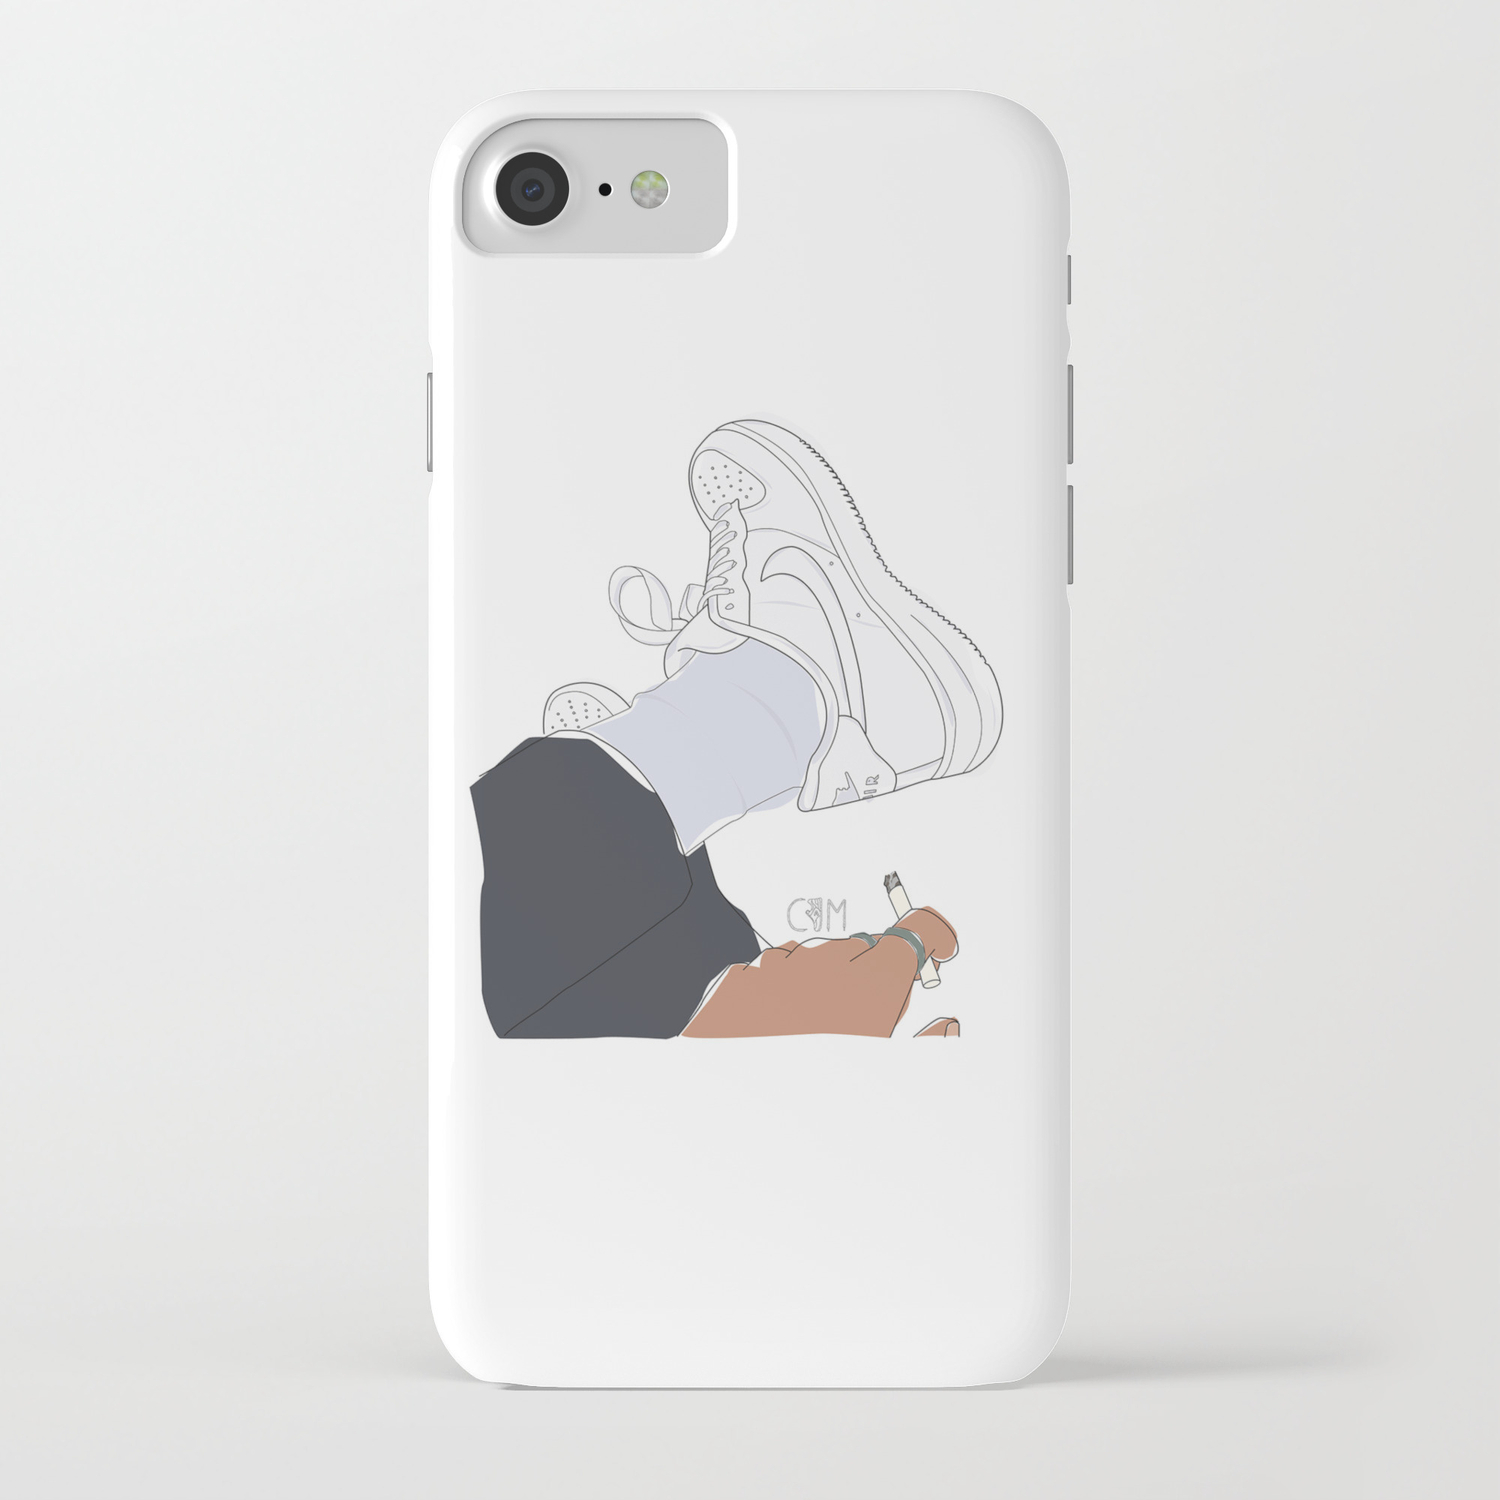 nike air force 1 iphone 7 case